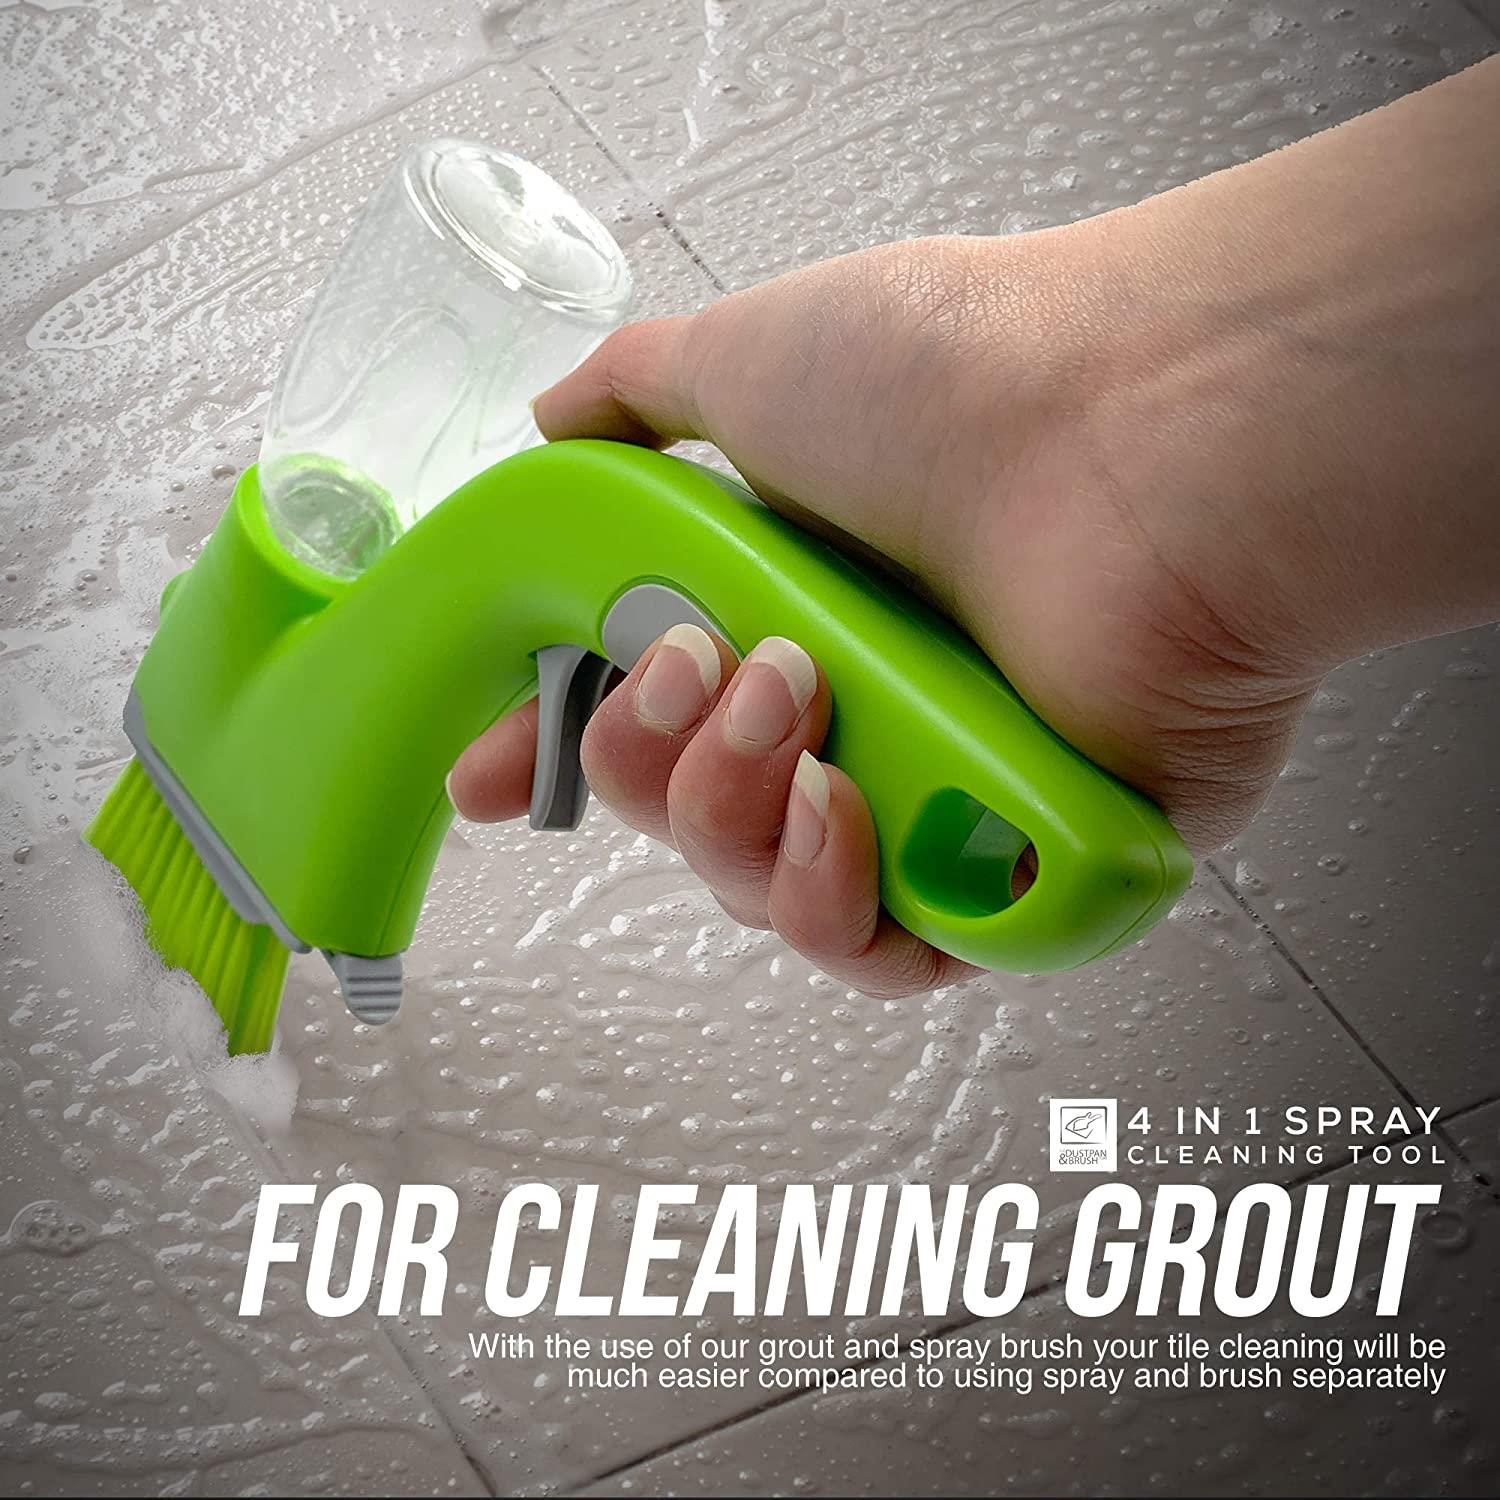 4 in 1 Grout and Tile Spray Cleaning Kit